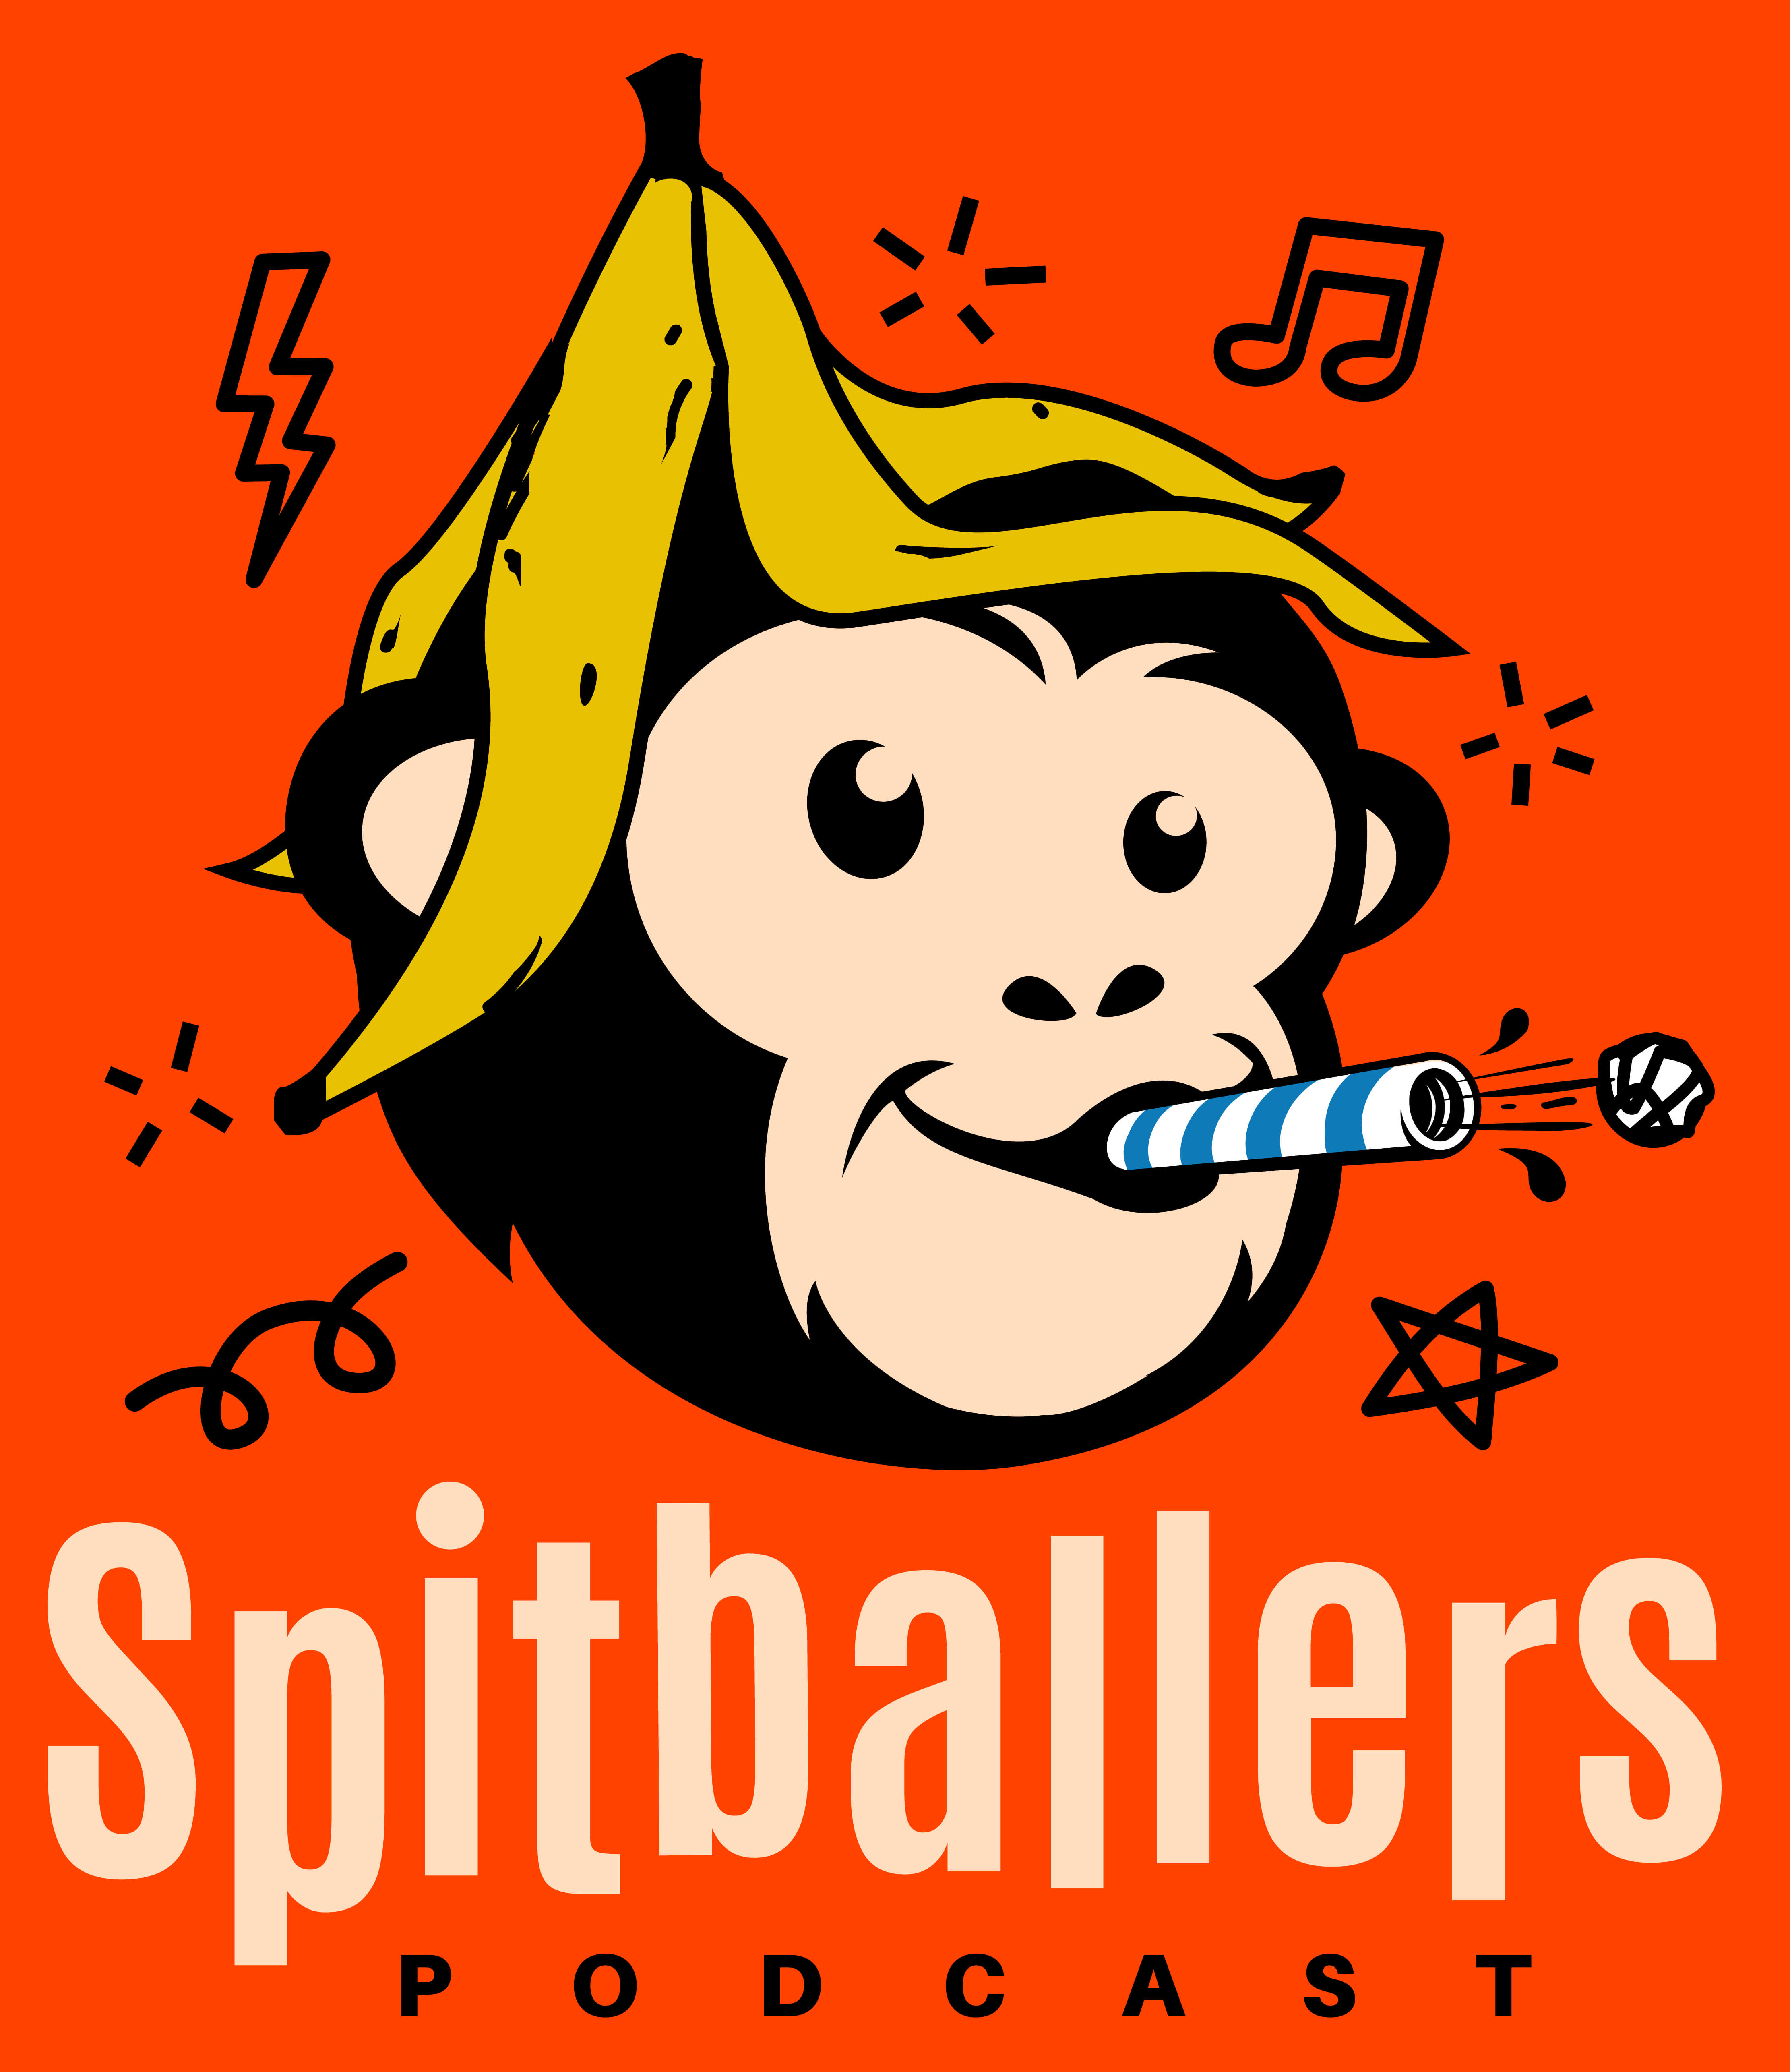 Spitballers Podcast – The funniest comedy podcast of all time.